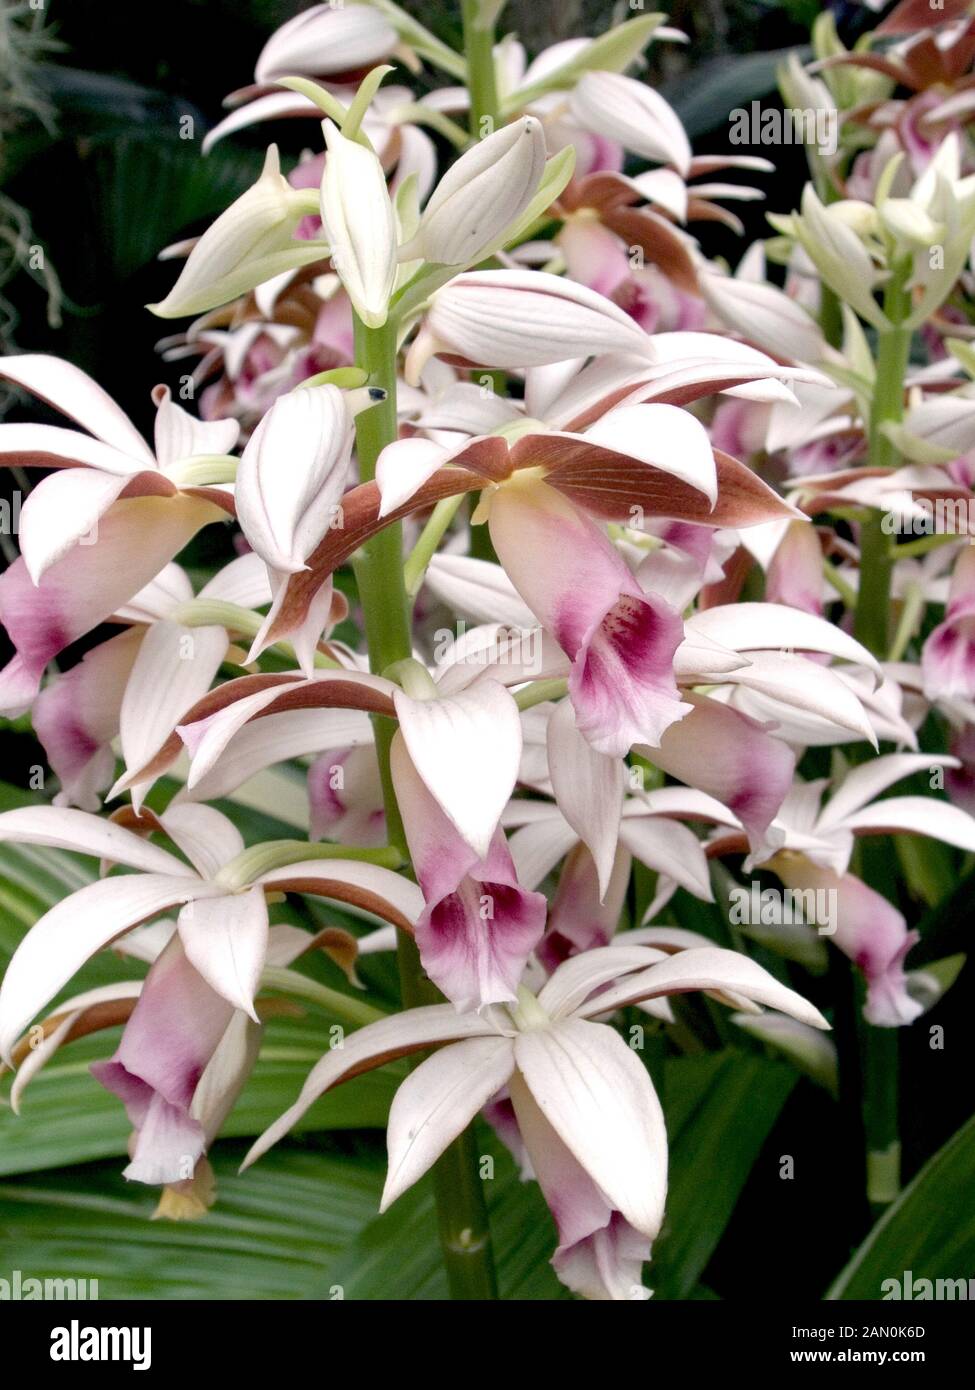 PHAIUS 'WINDY HILL' (ORCHID) Stock Photo